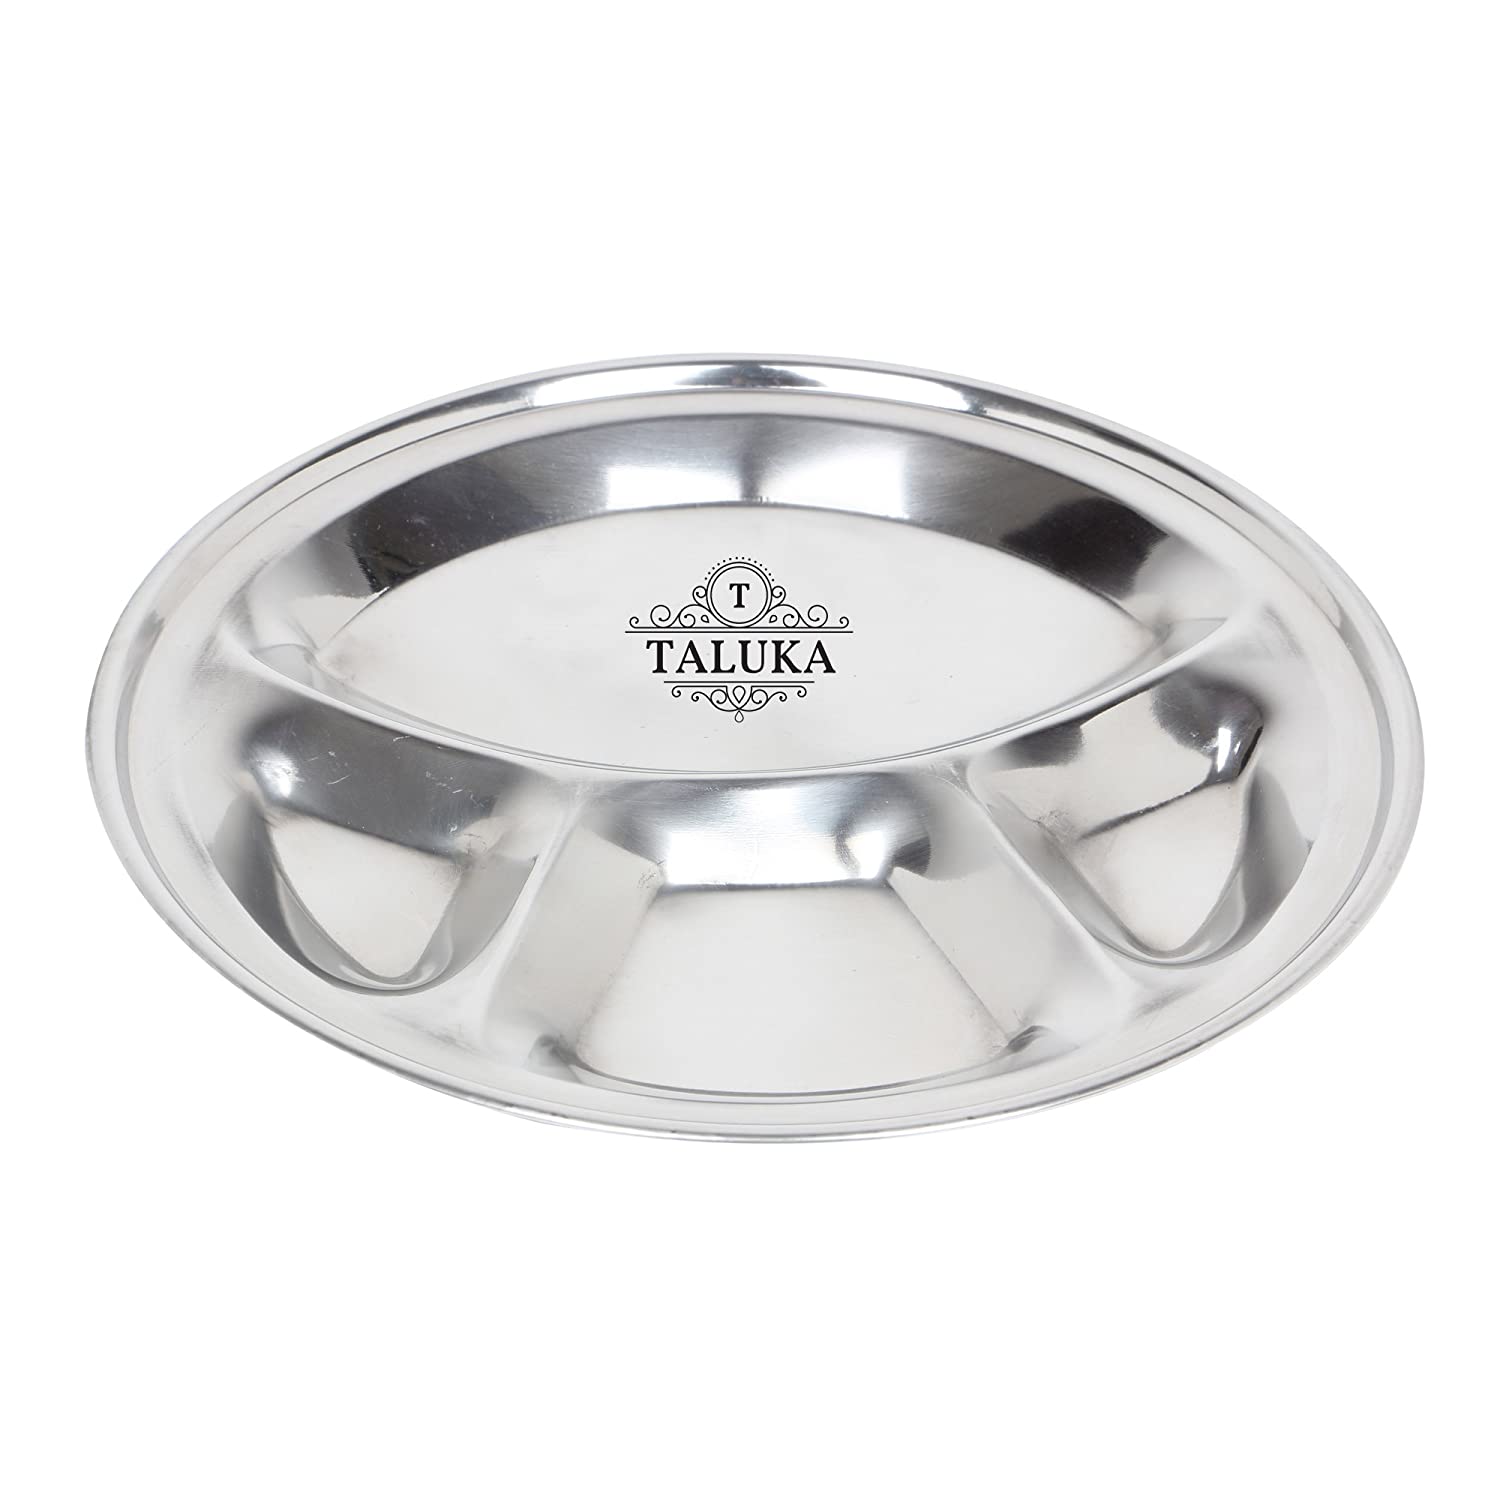 Taluka (10.5 x 0.6 Inches Approx) Stainless Steel Dinner Plate Food Plate for Home Use Hotel Restaurant